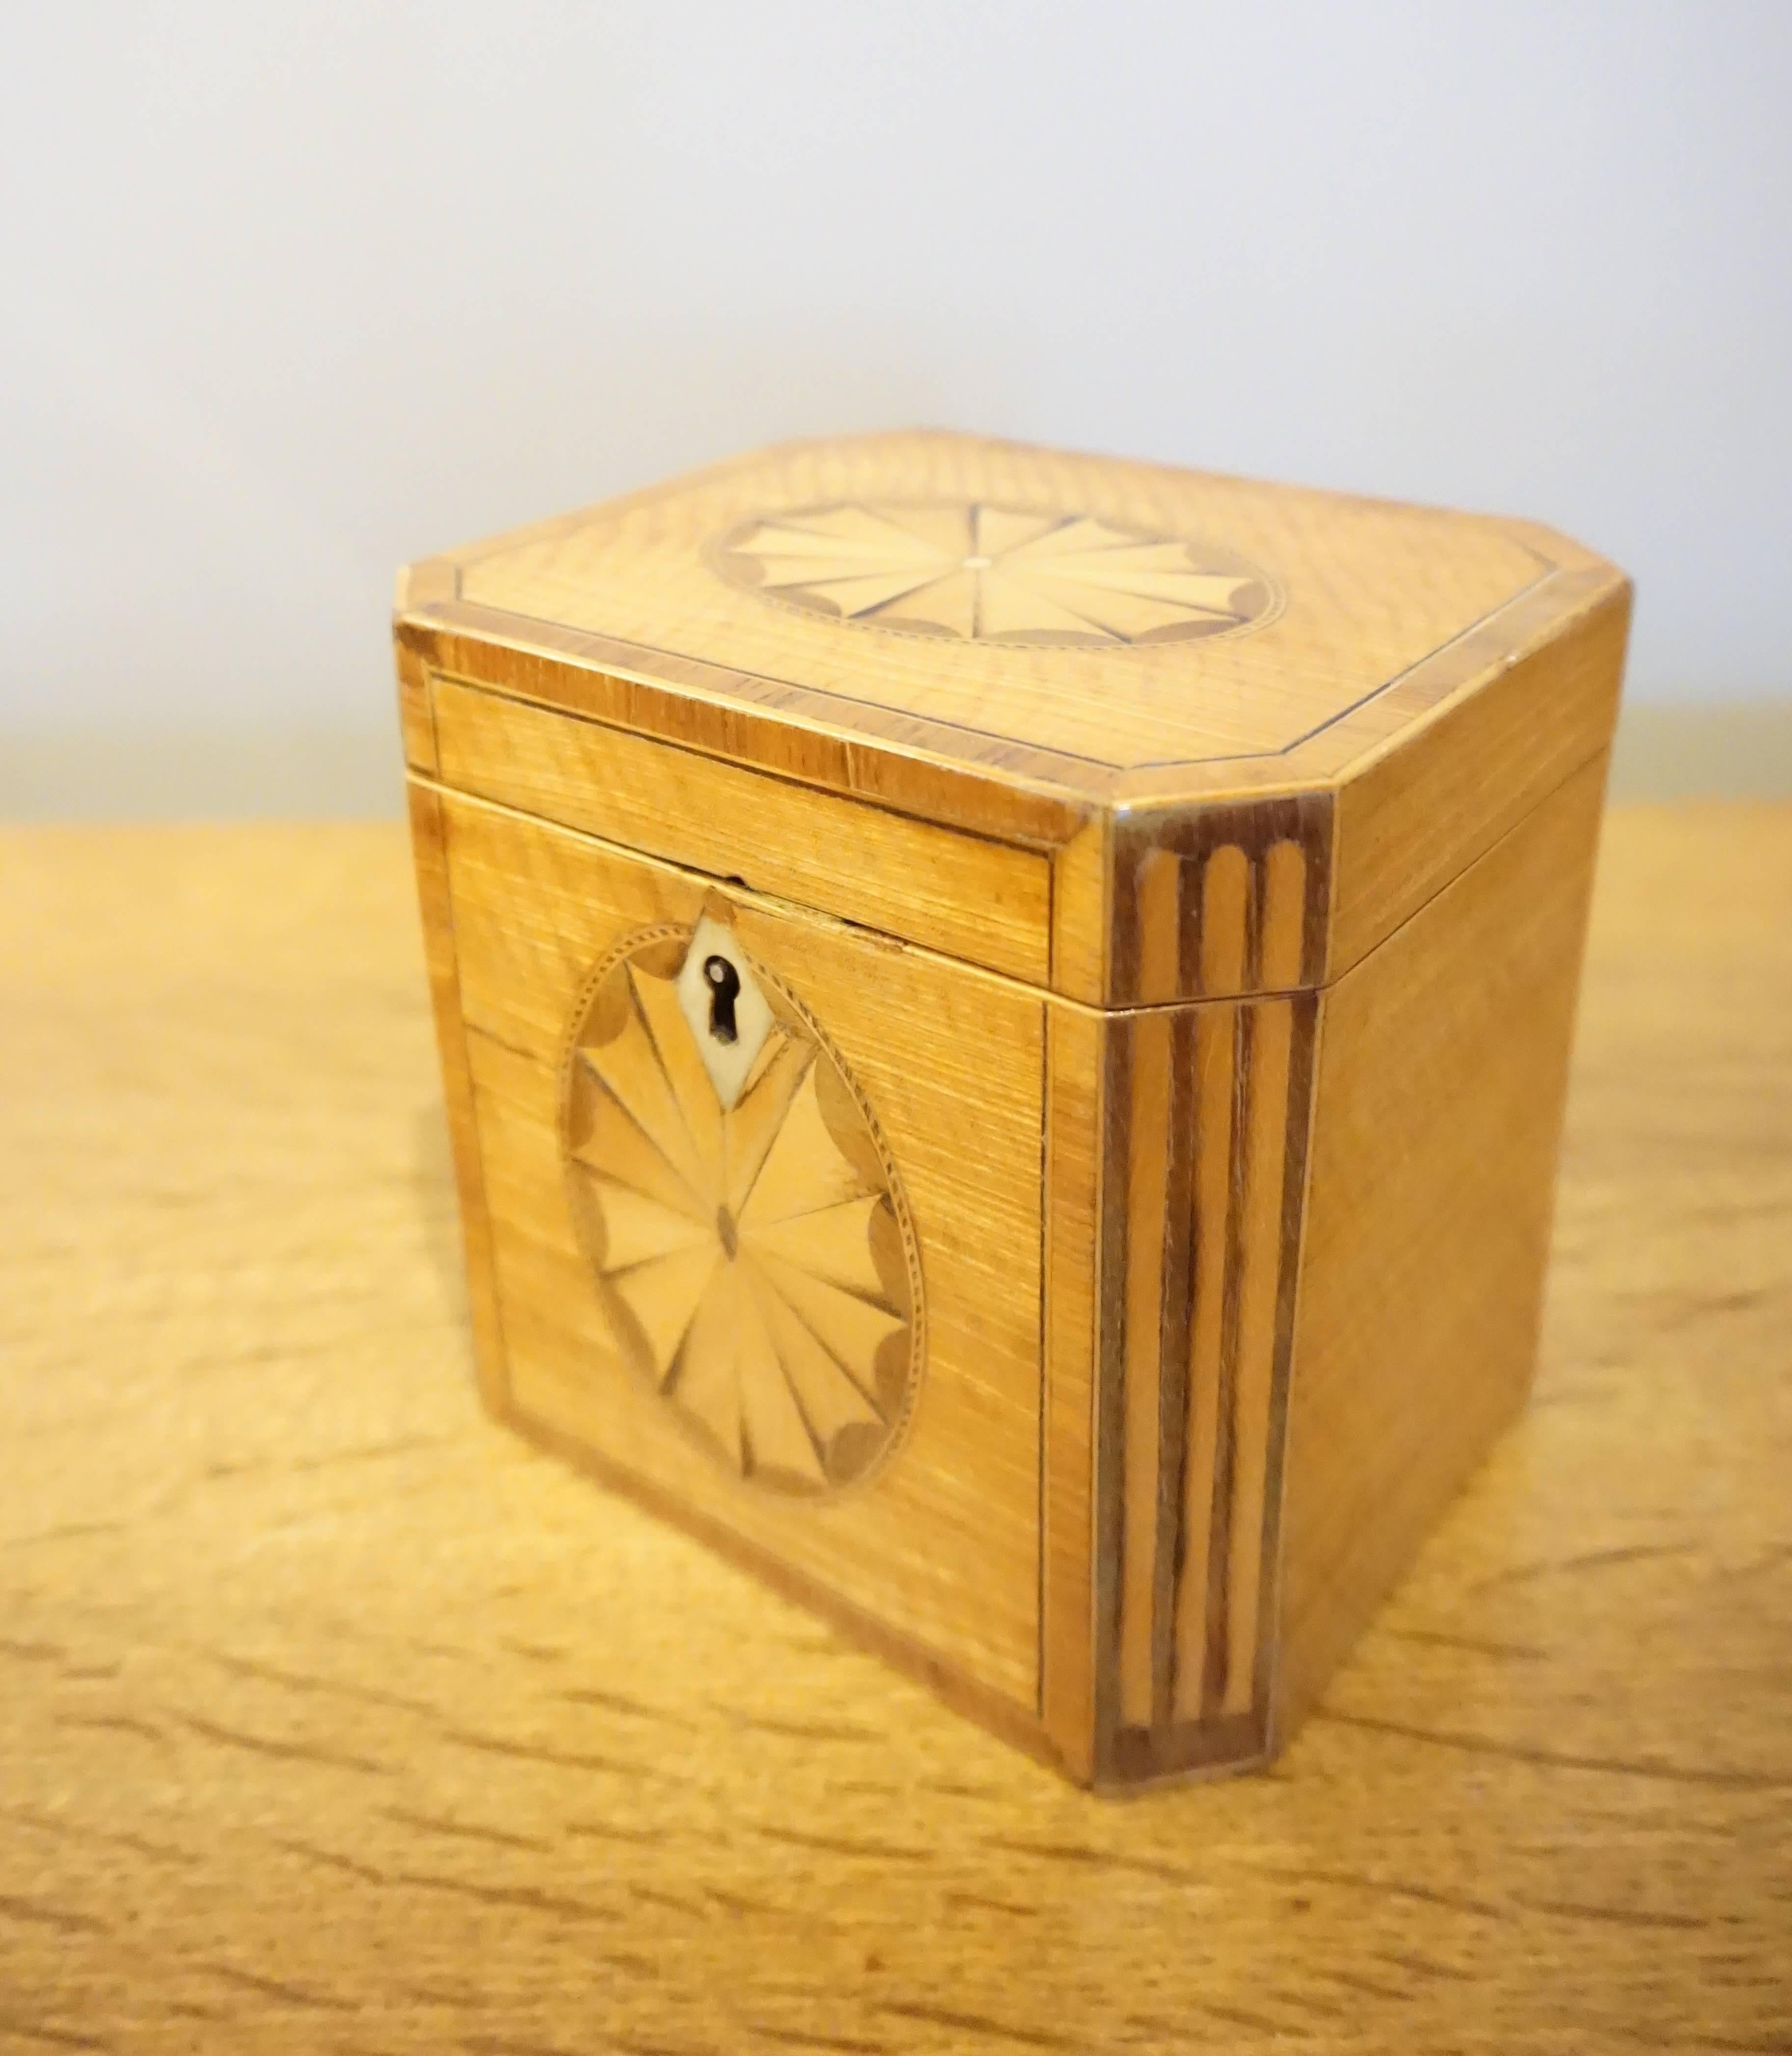 An English George III period inlaid satinwood octagonal tea caddy. Circa 1800. The top and front surfaces of the box are decorated with fan motifs set into oval frameworks and the edges are cross banded with rosewood and inlaid ebony. The canted